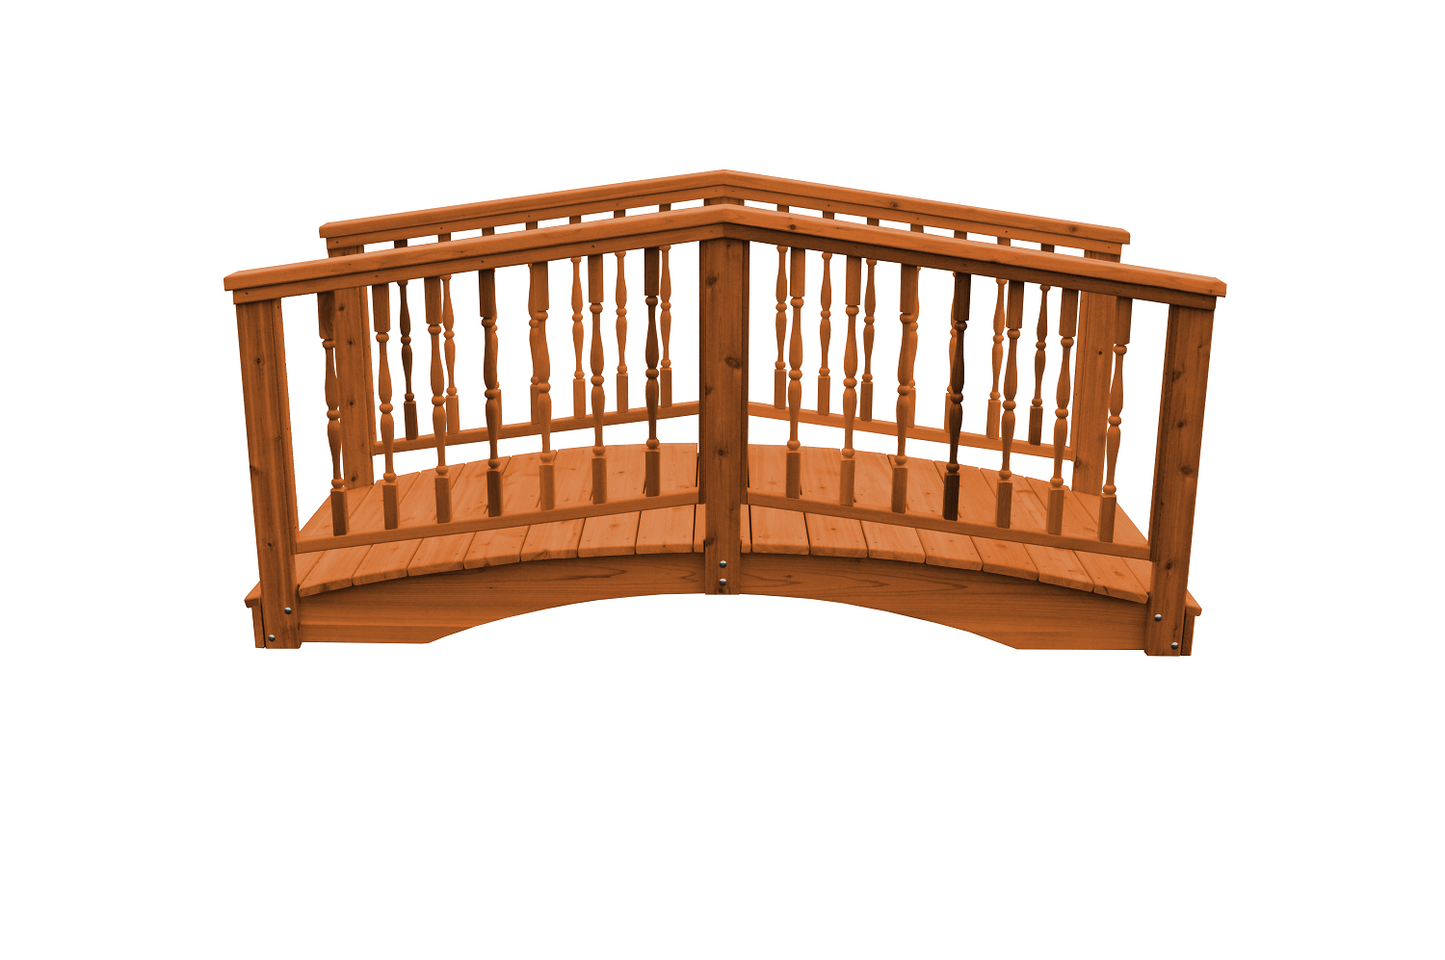 A&L Furniture Co. Western Red Cedar 3' x 10' Spindle Bridge - LEAD TIME TO SHIP 2 WEEKS